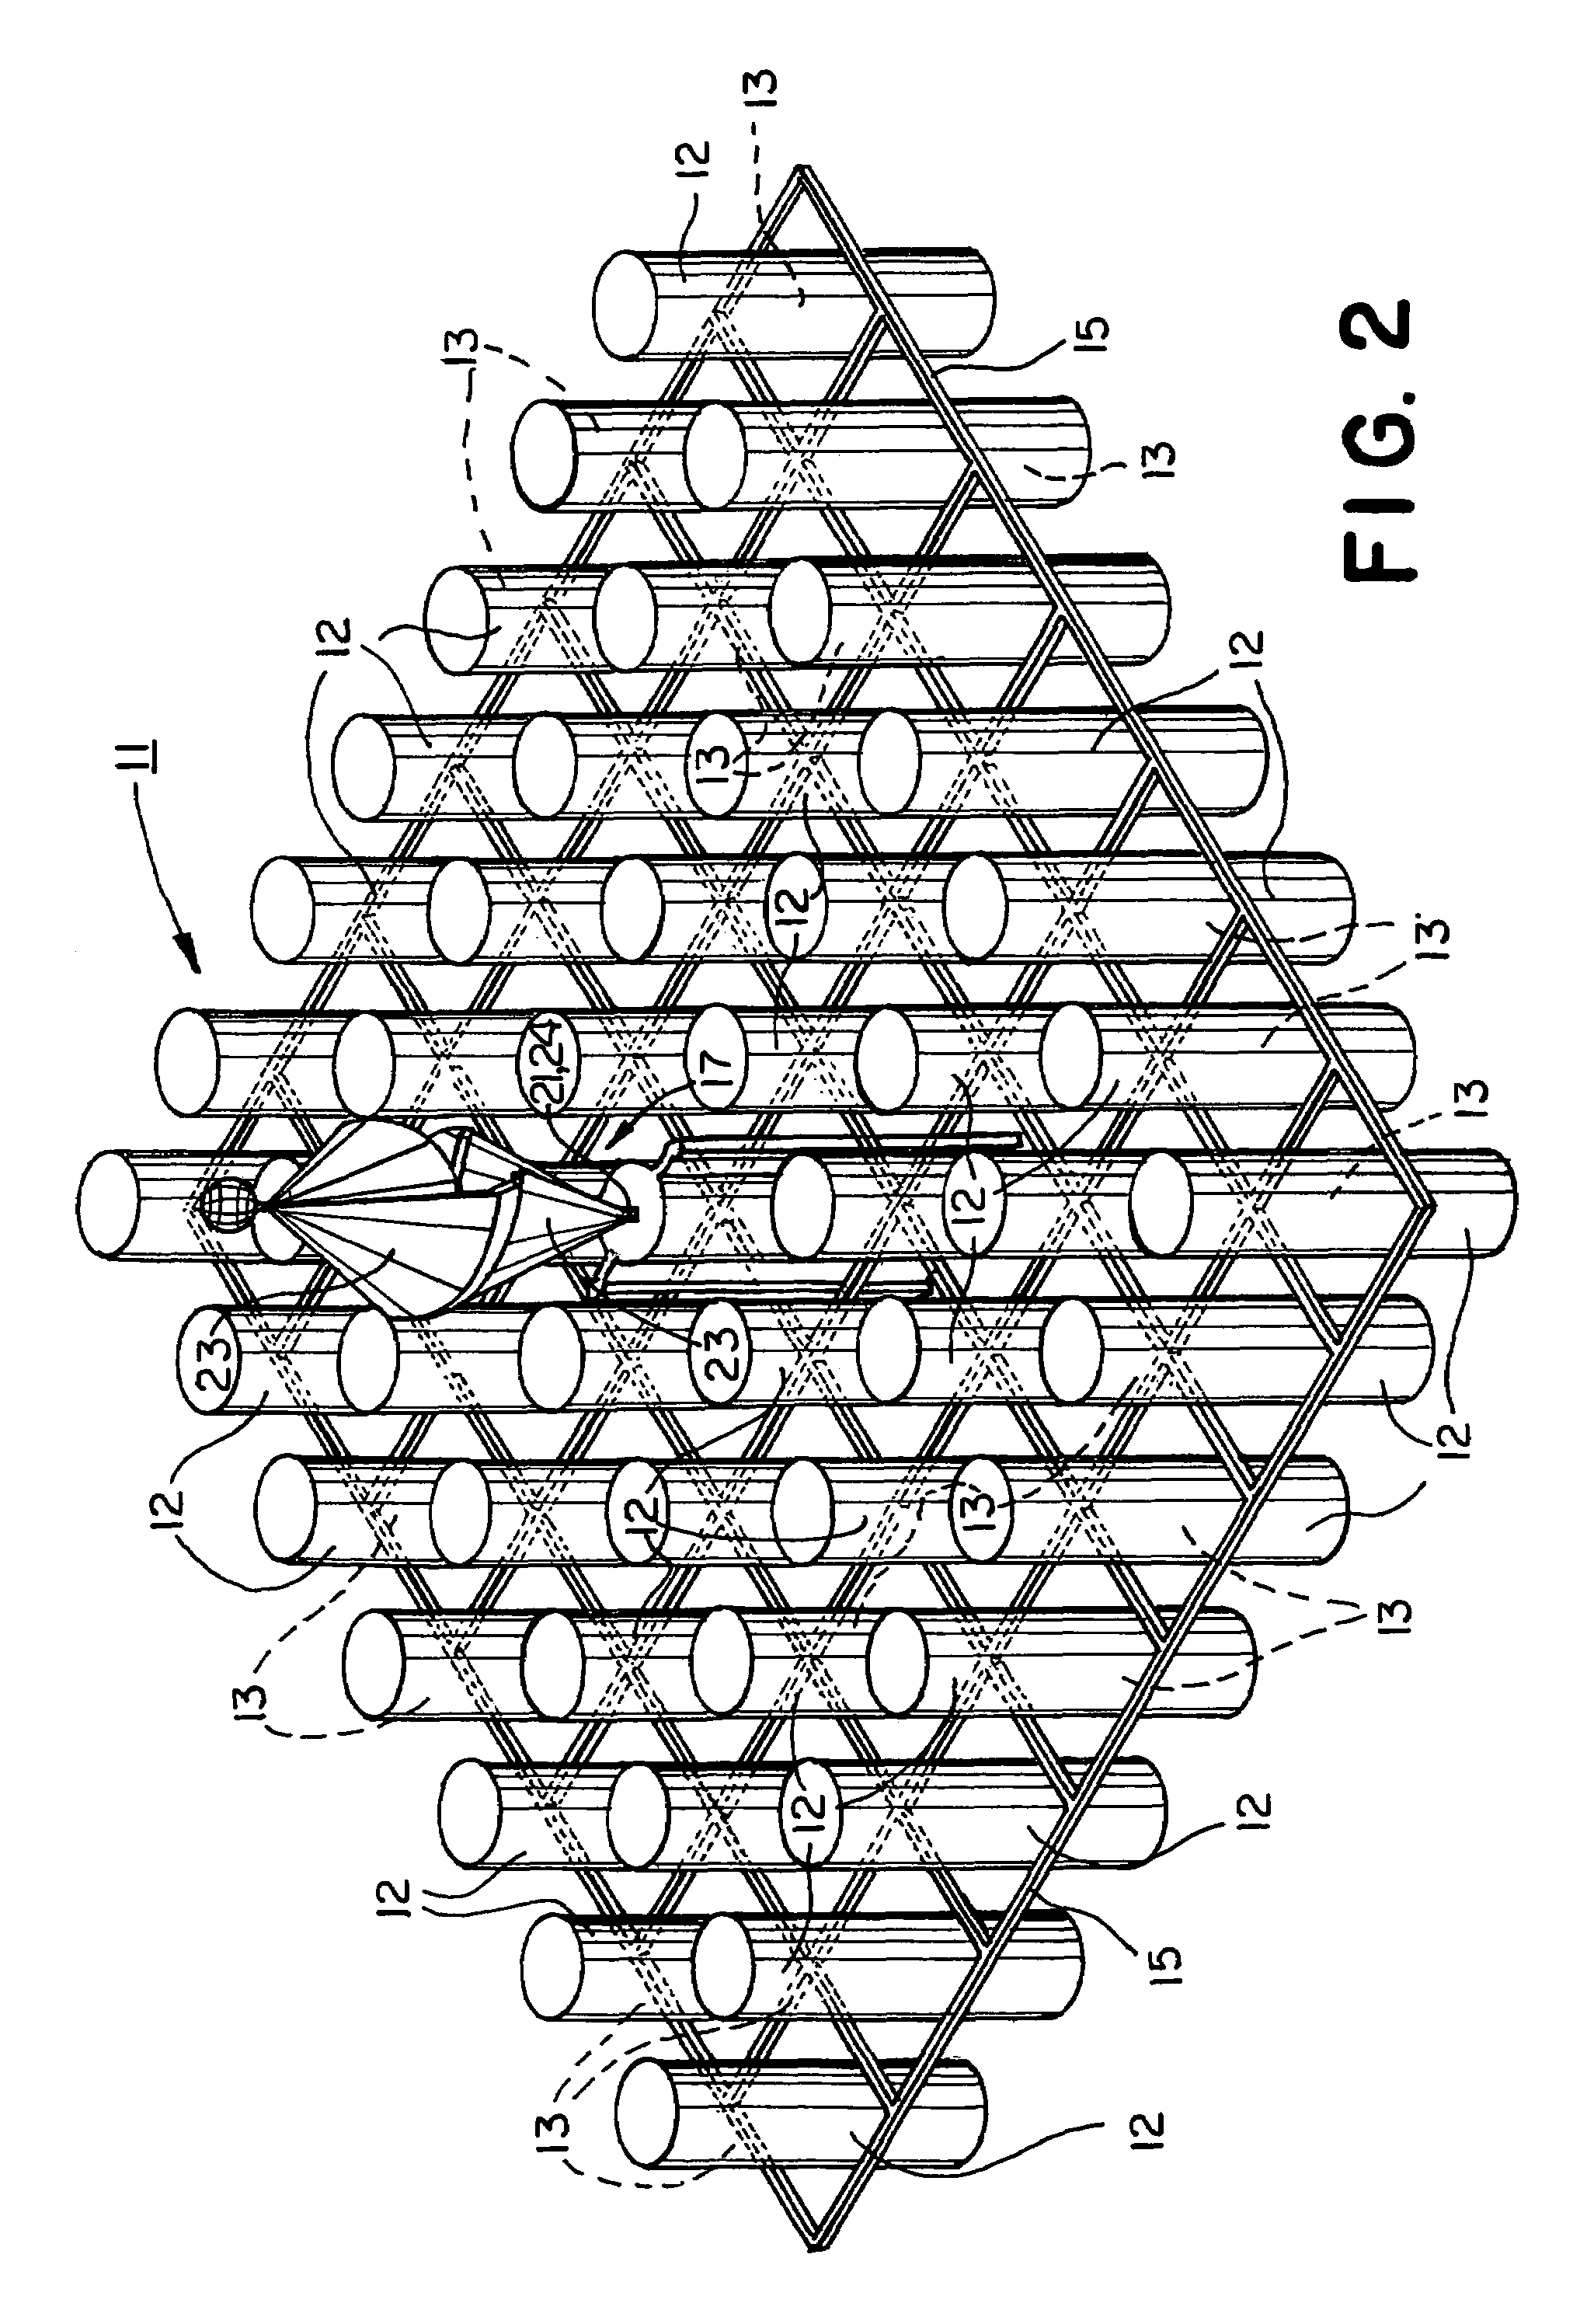 Systems and vessels for producing hydrocarbons and/or water, and methods for same